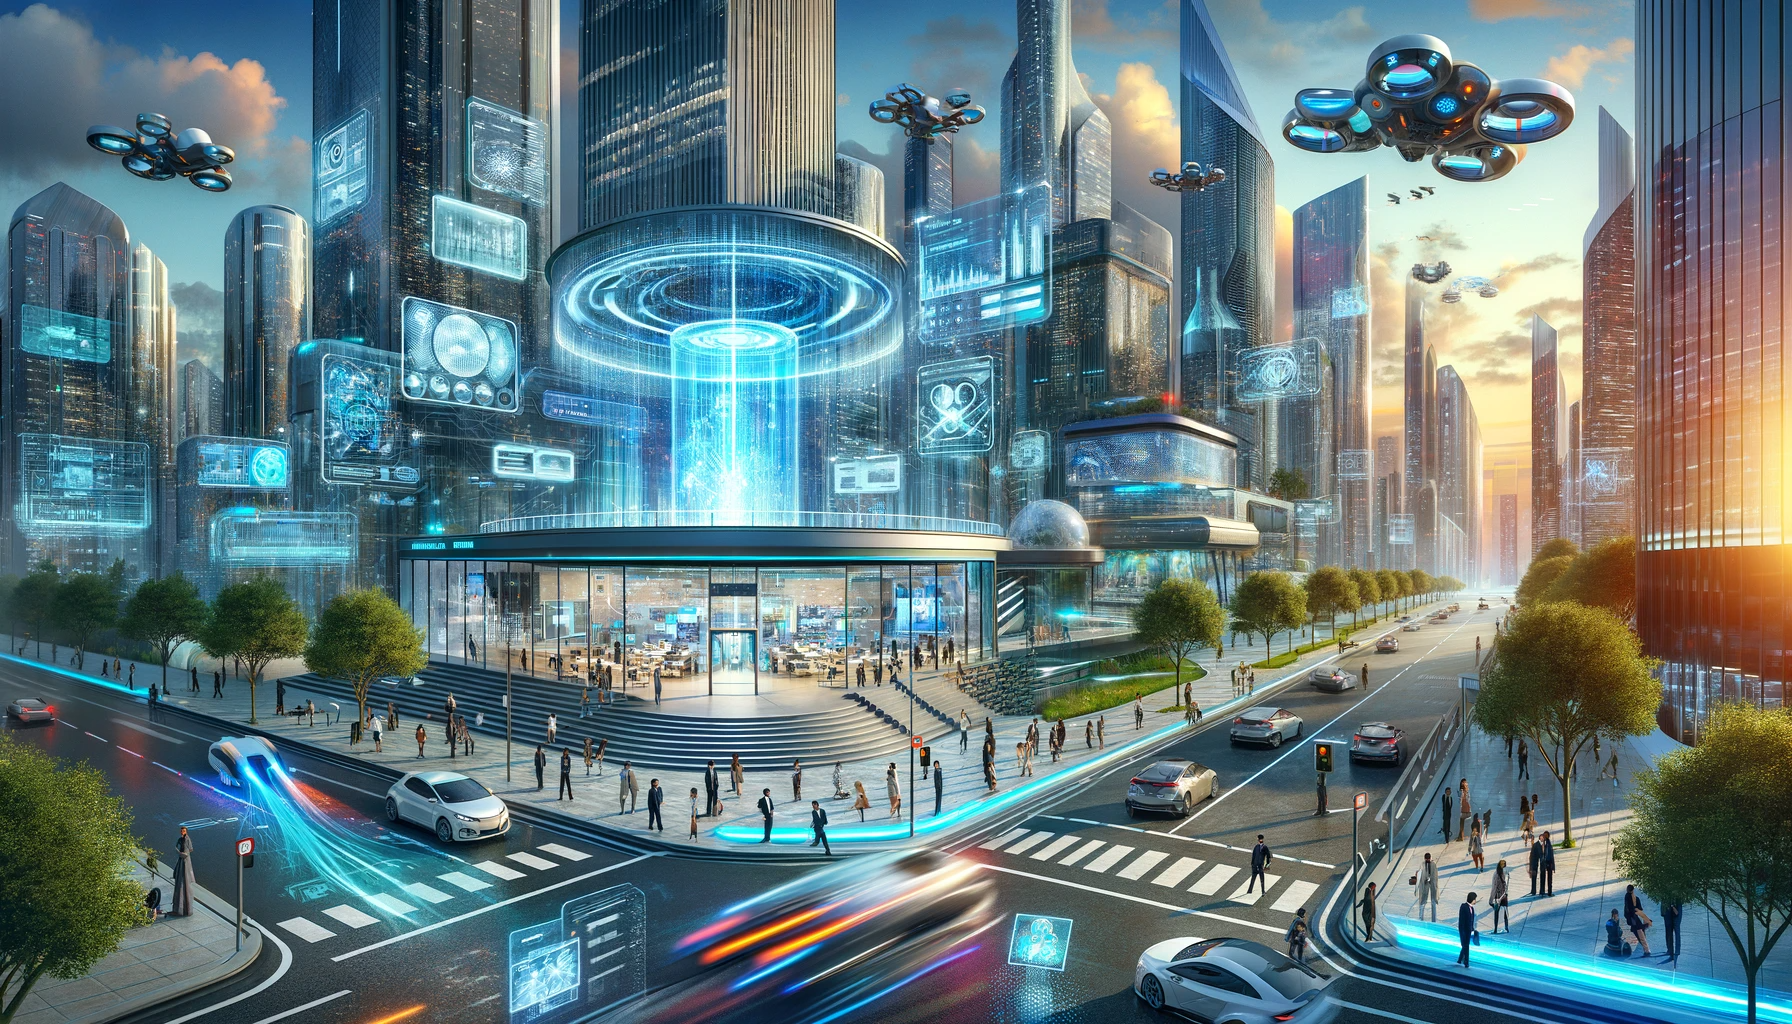 DALL·E 2024-01-20 18.57.40 - An imaginative and futuristic cityscape, showcasing a world in 2050 with advanced technology and architecture. The scene includes a sleek, digital ban